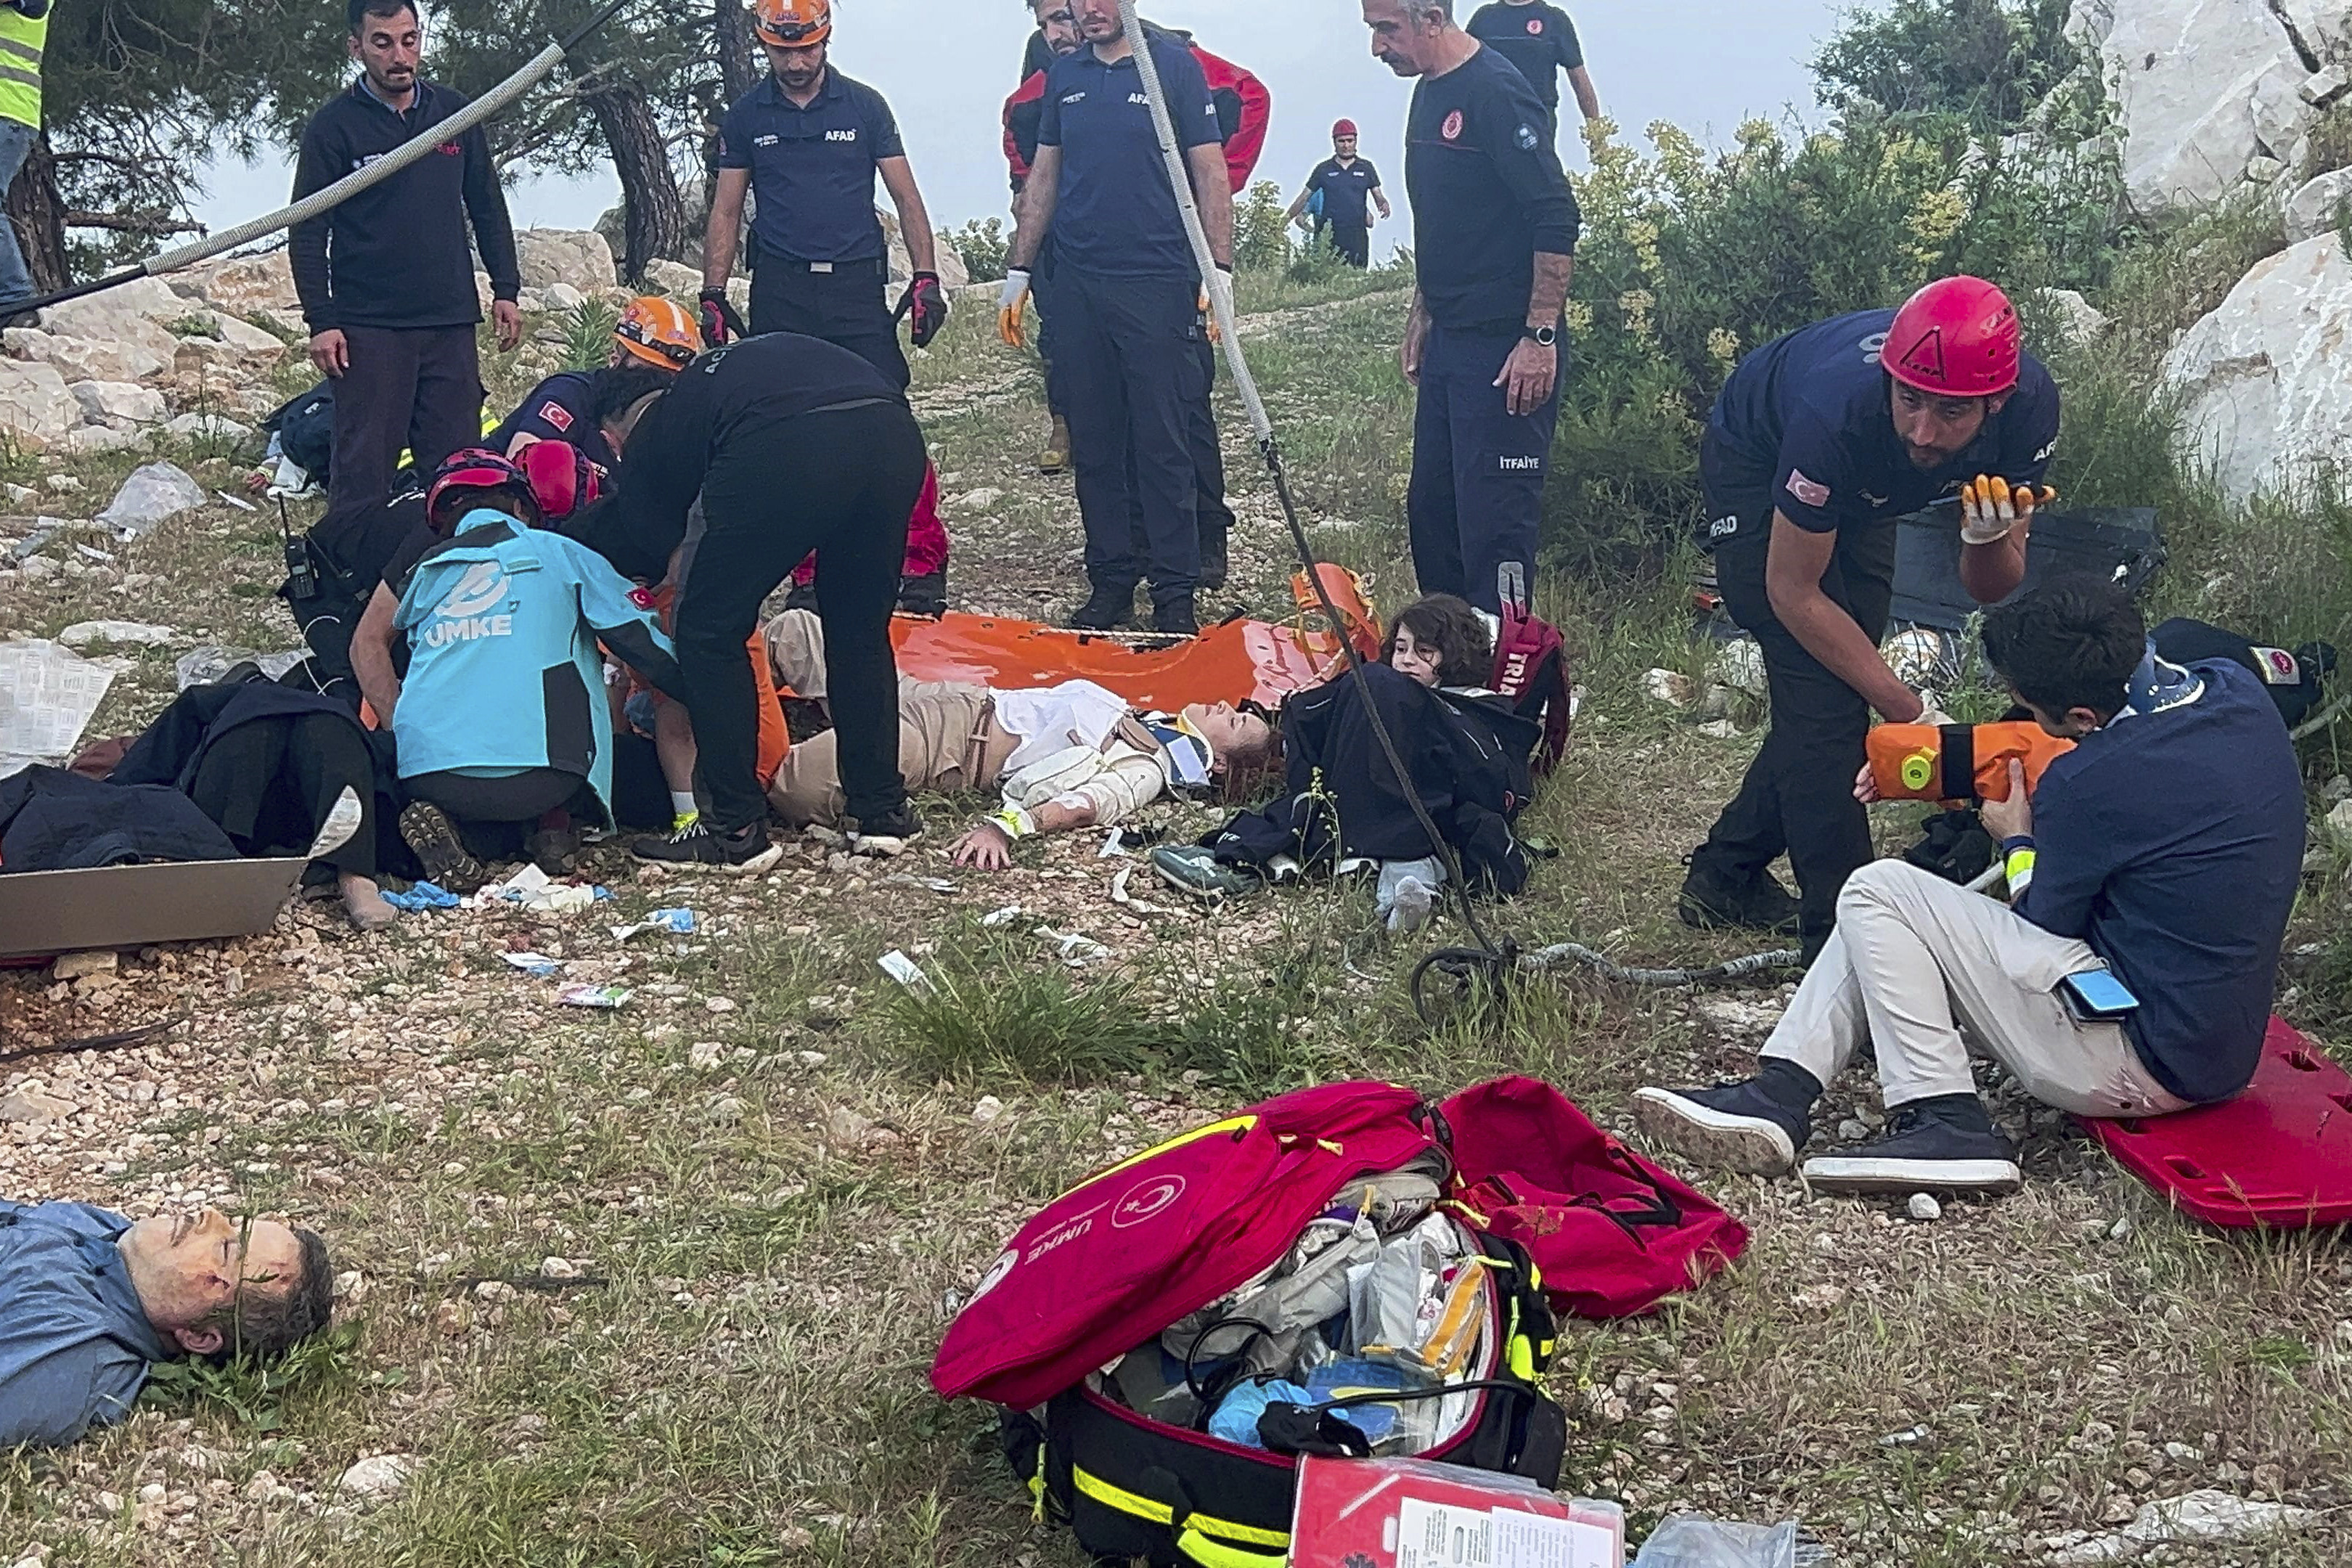 174 people stranded in the air are rescued, almost a day after a fatal cable car accident in turkey